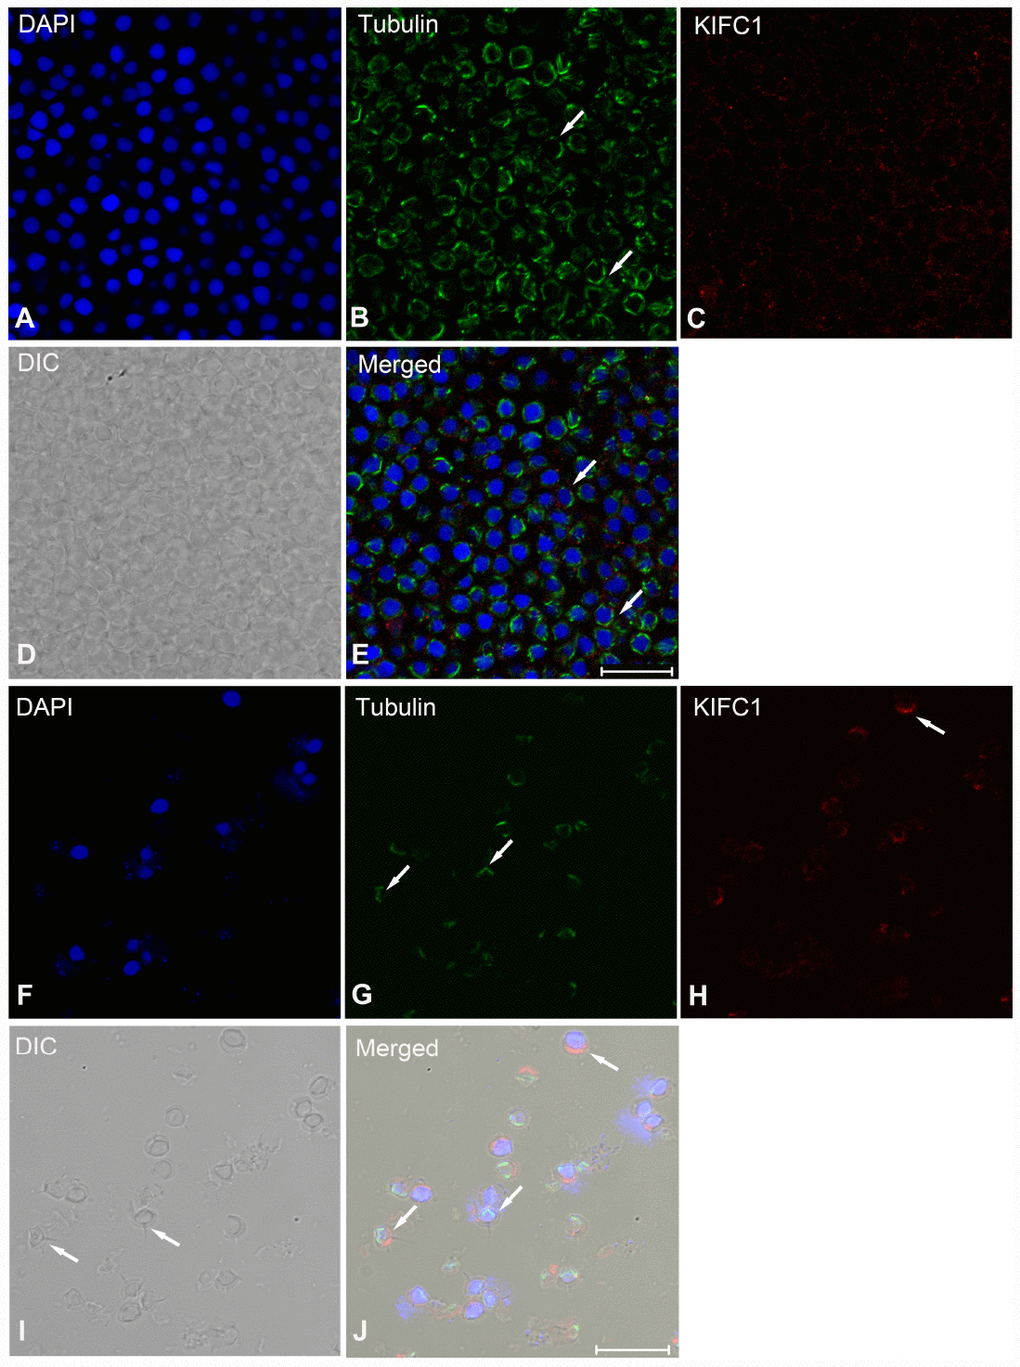 Immunofluorescent localization of KIFC1 and tubulin during post-spermiogenesis in the vas deferens and in mature sperm from spermatophore of P. japonicus. (A–E) Spermatid during post-spermiogenesis in the vas deferens. The signal of KIFC1 was very weak. The microtubules exhibited spindle morphology around the sperm nucleus (white arrows). (F–J) Mature sperm in spermatophore. KIFC1 and microtubules have completely separated localization in the mature sperm. From (J), it was clearly that KIFC1 was mainly localized at acrosome, while the microtubules distributed in the opposite side cytoplasm. Blue: DAPI, Green: tubulin, Red: KIFC1. Scale bar = 20μm.